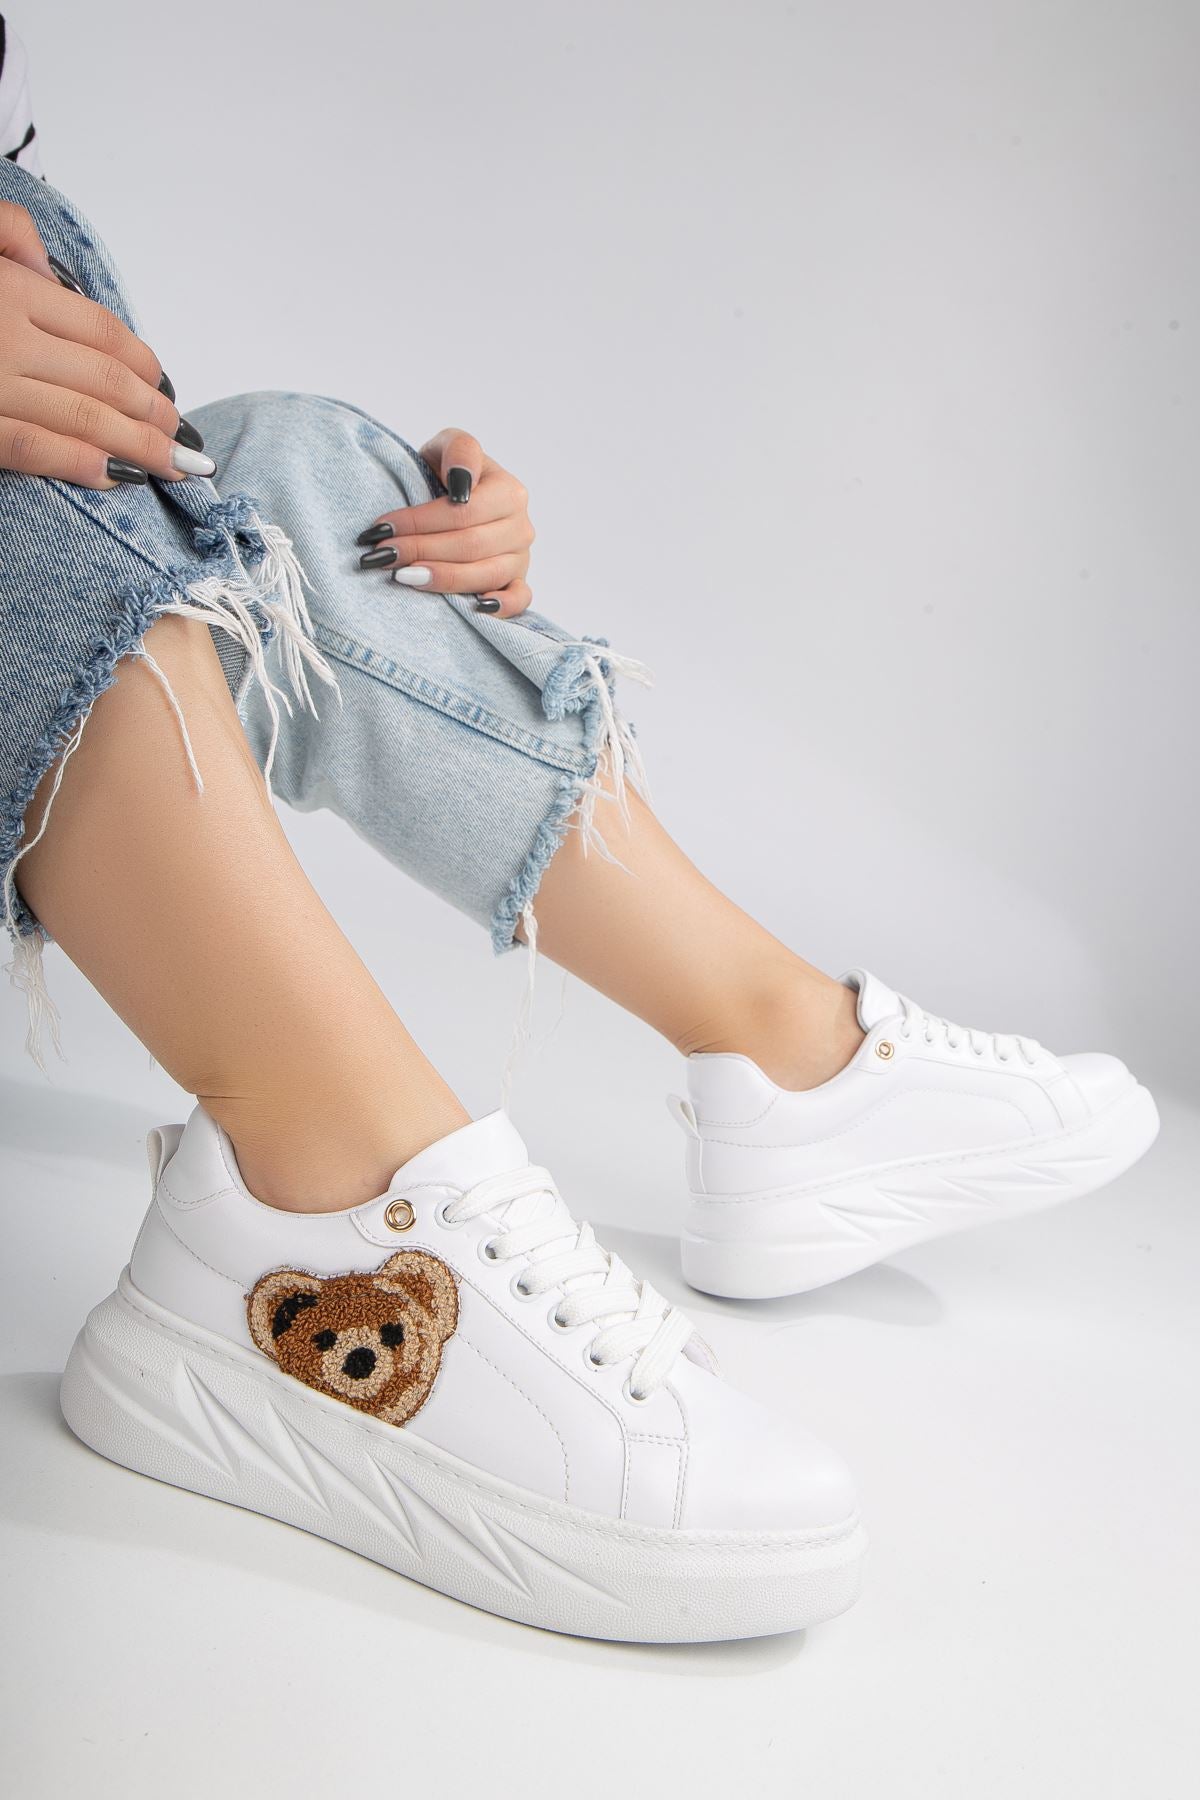 Women's Sianne White Thick Soled Sneakers with Teddy Bear Detail - STREETMODE ™